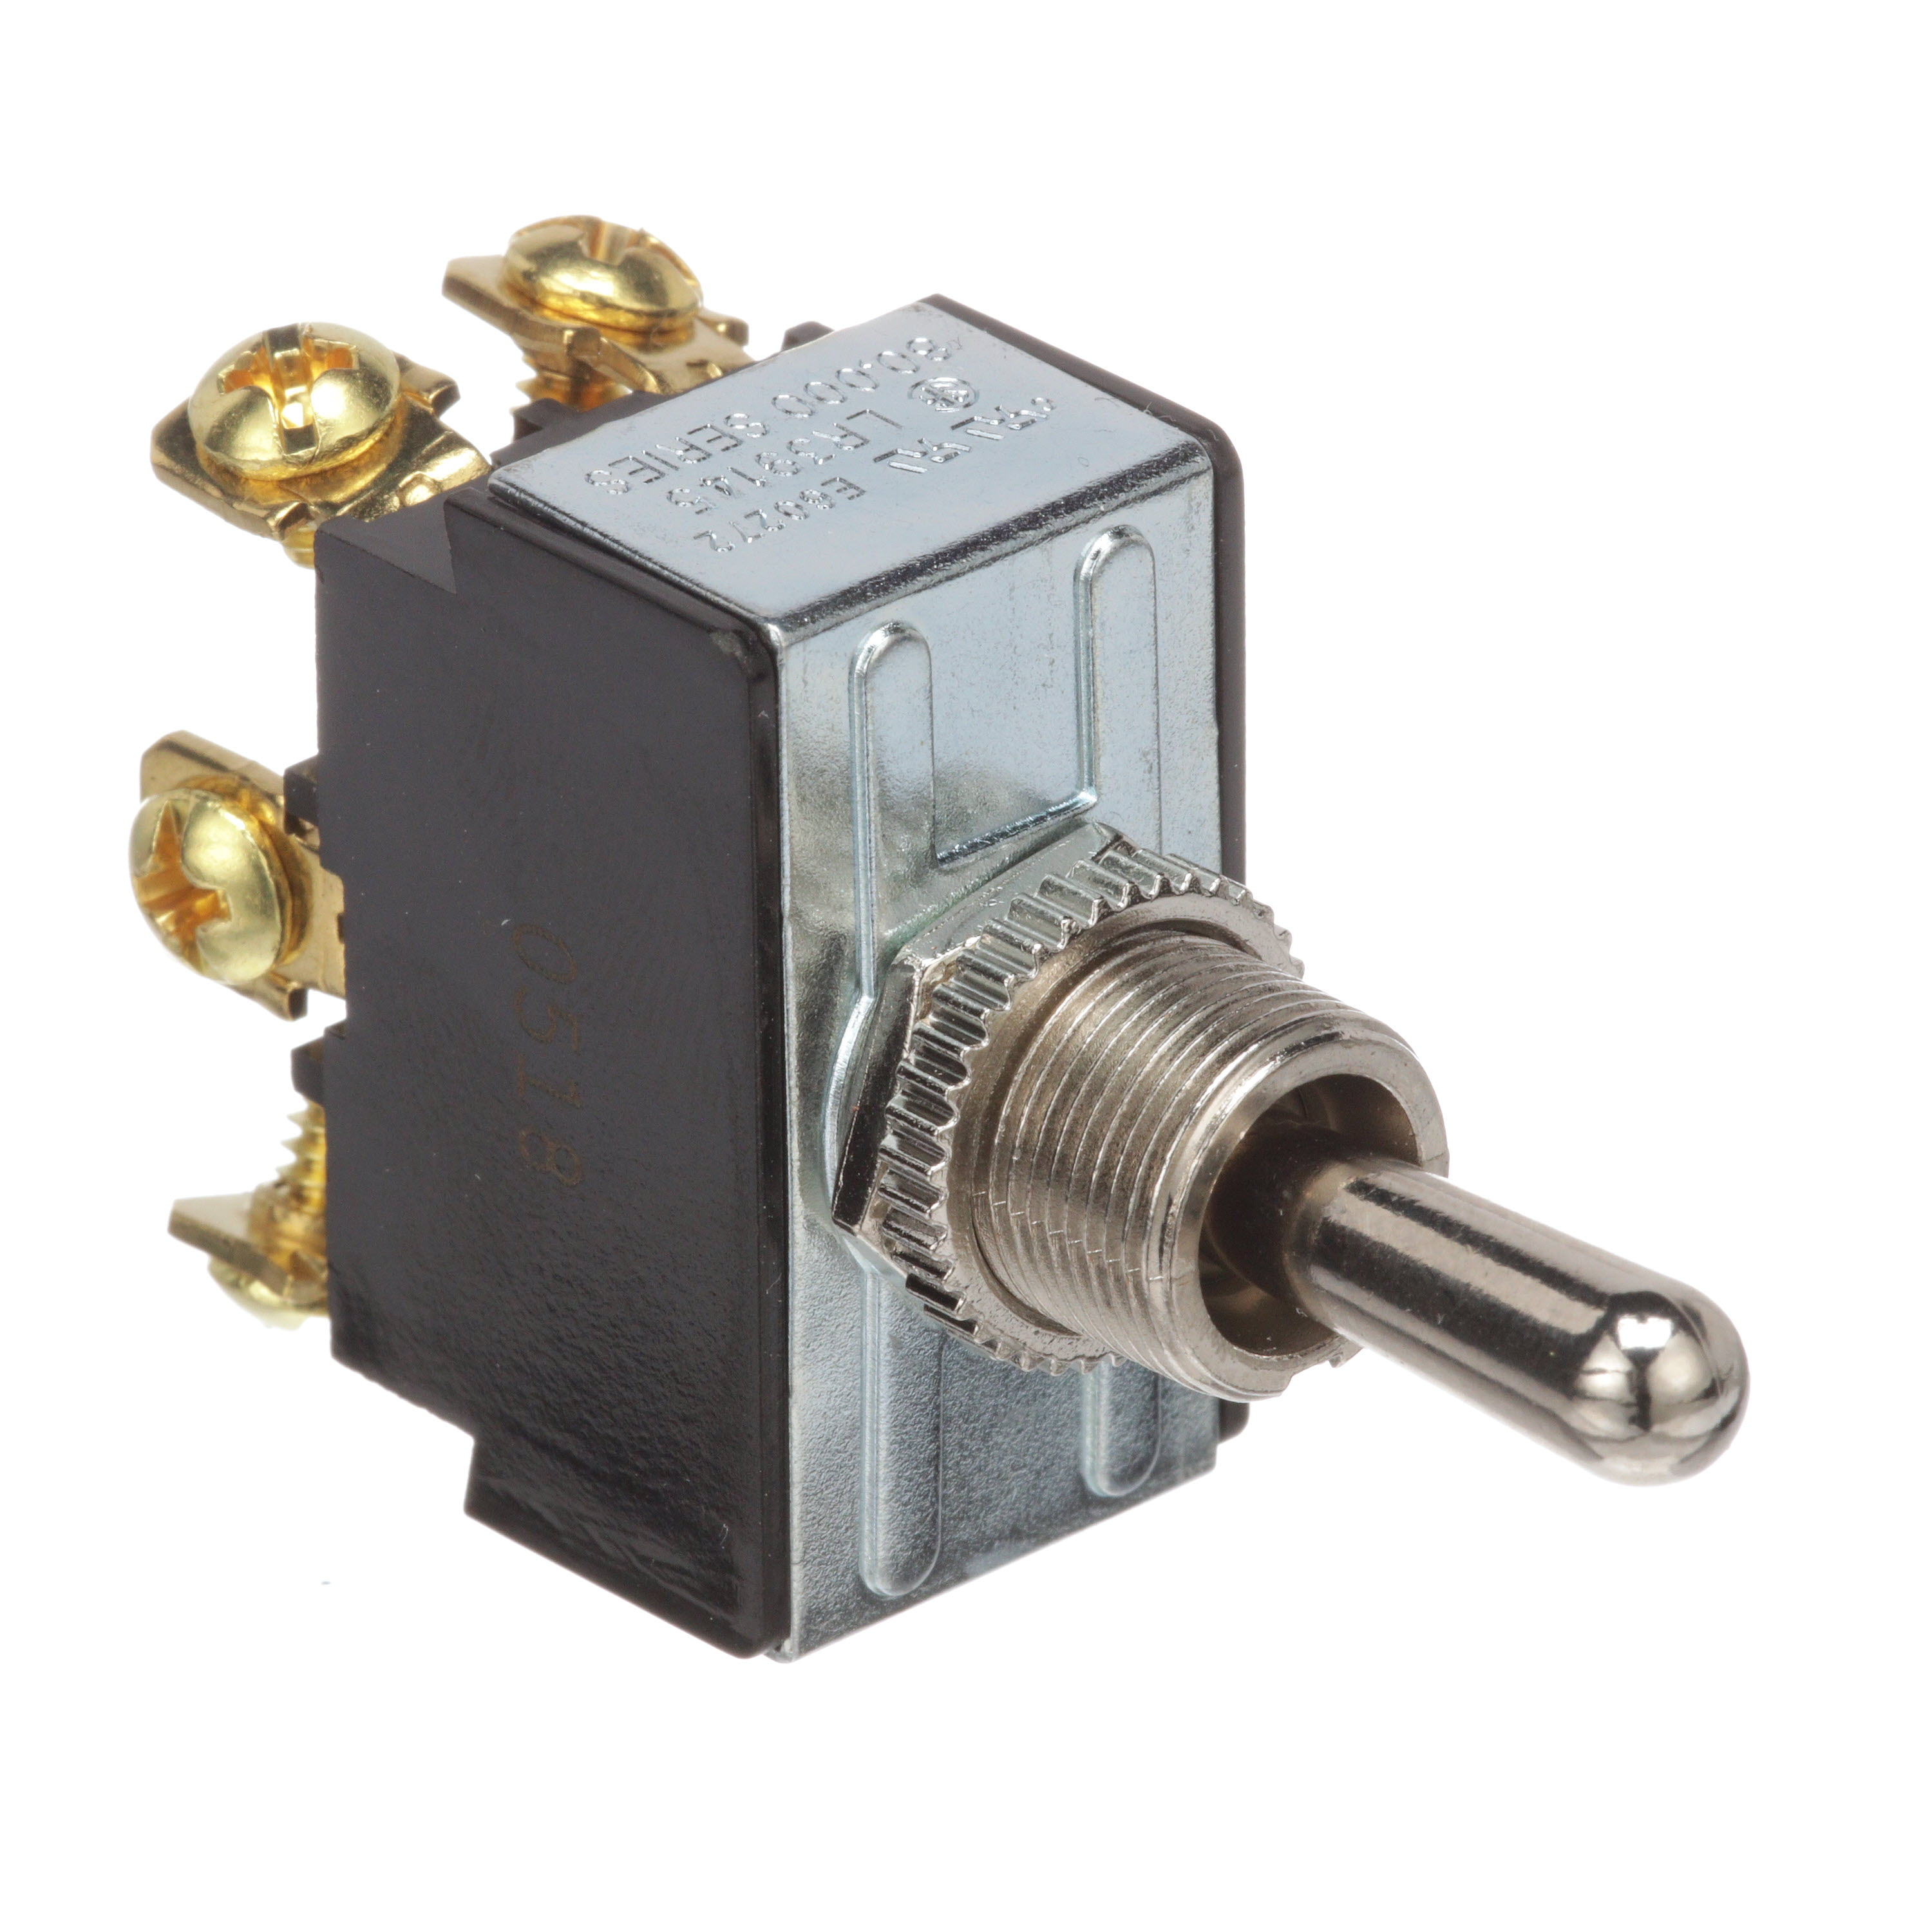 NTE Electronics 54-096 Bat Handle Toggle Switch SPST Circuit On-None-On Action 125V Inc. 6 Amp Brass/Nickel Plate Actuator Screw Mount Terminal